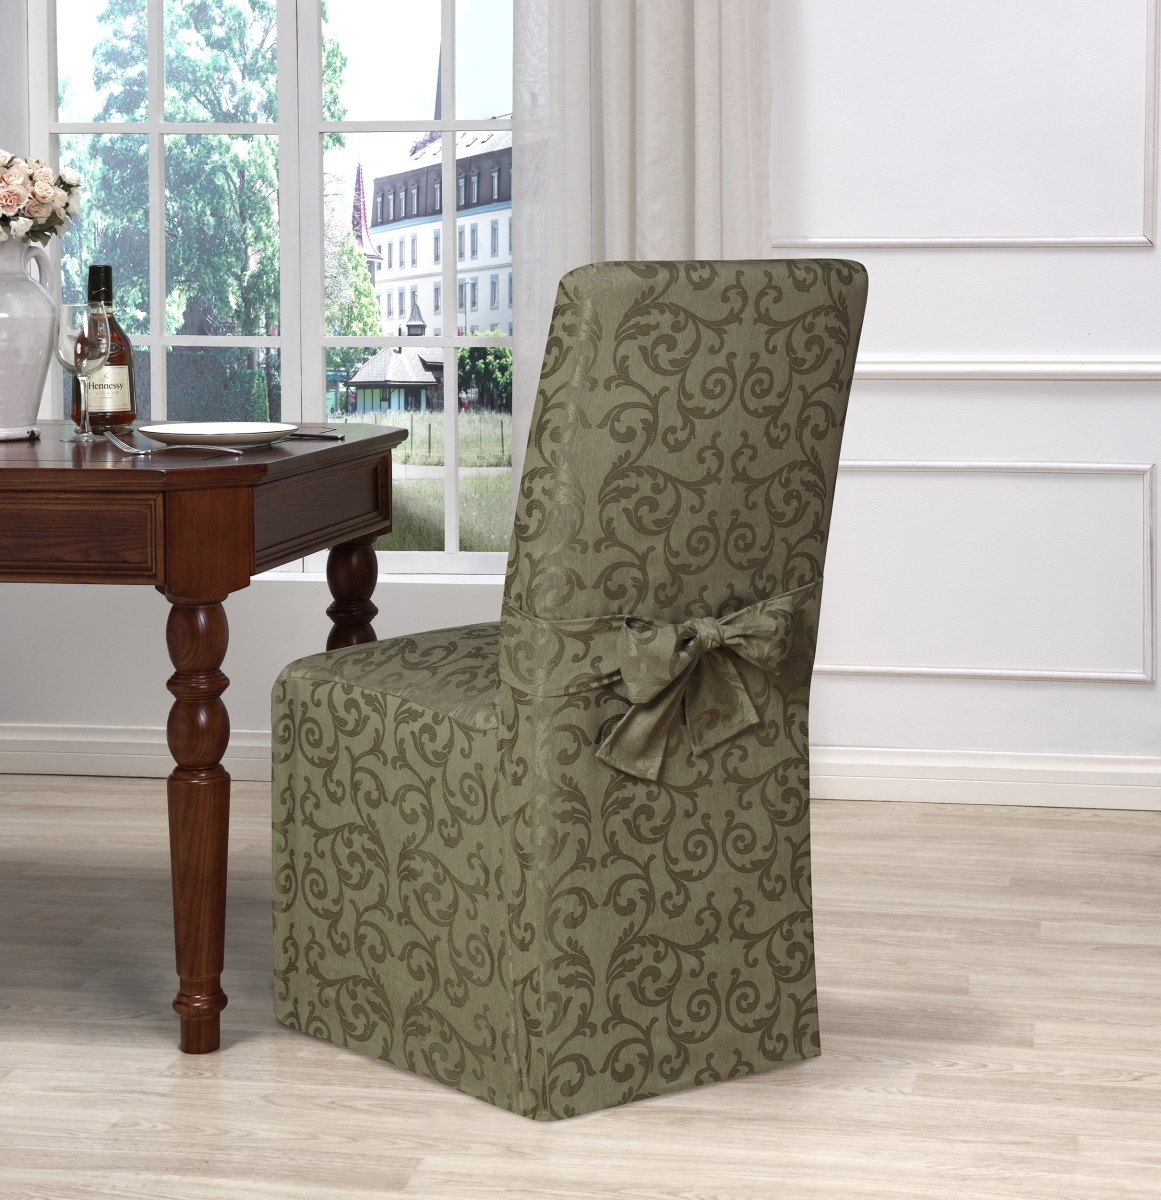 Amer-drc-gn Americana Dining Chair Cover, Green